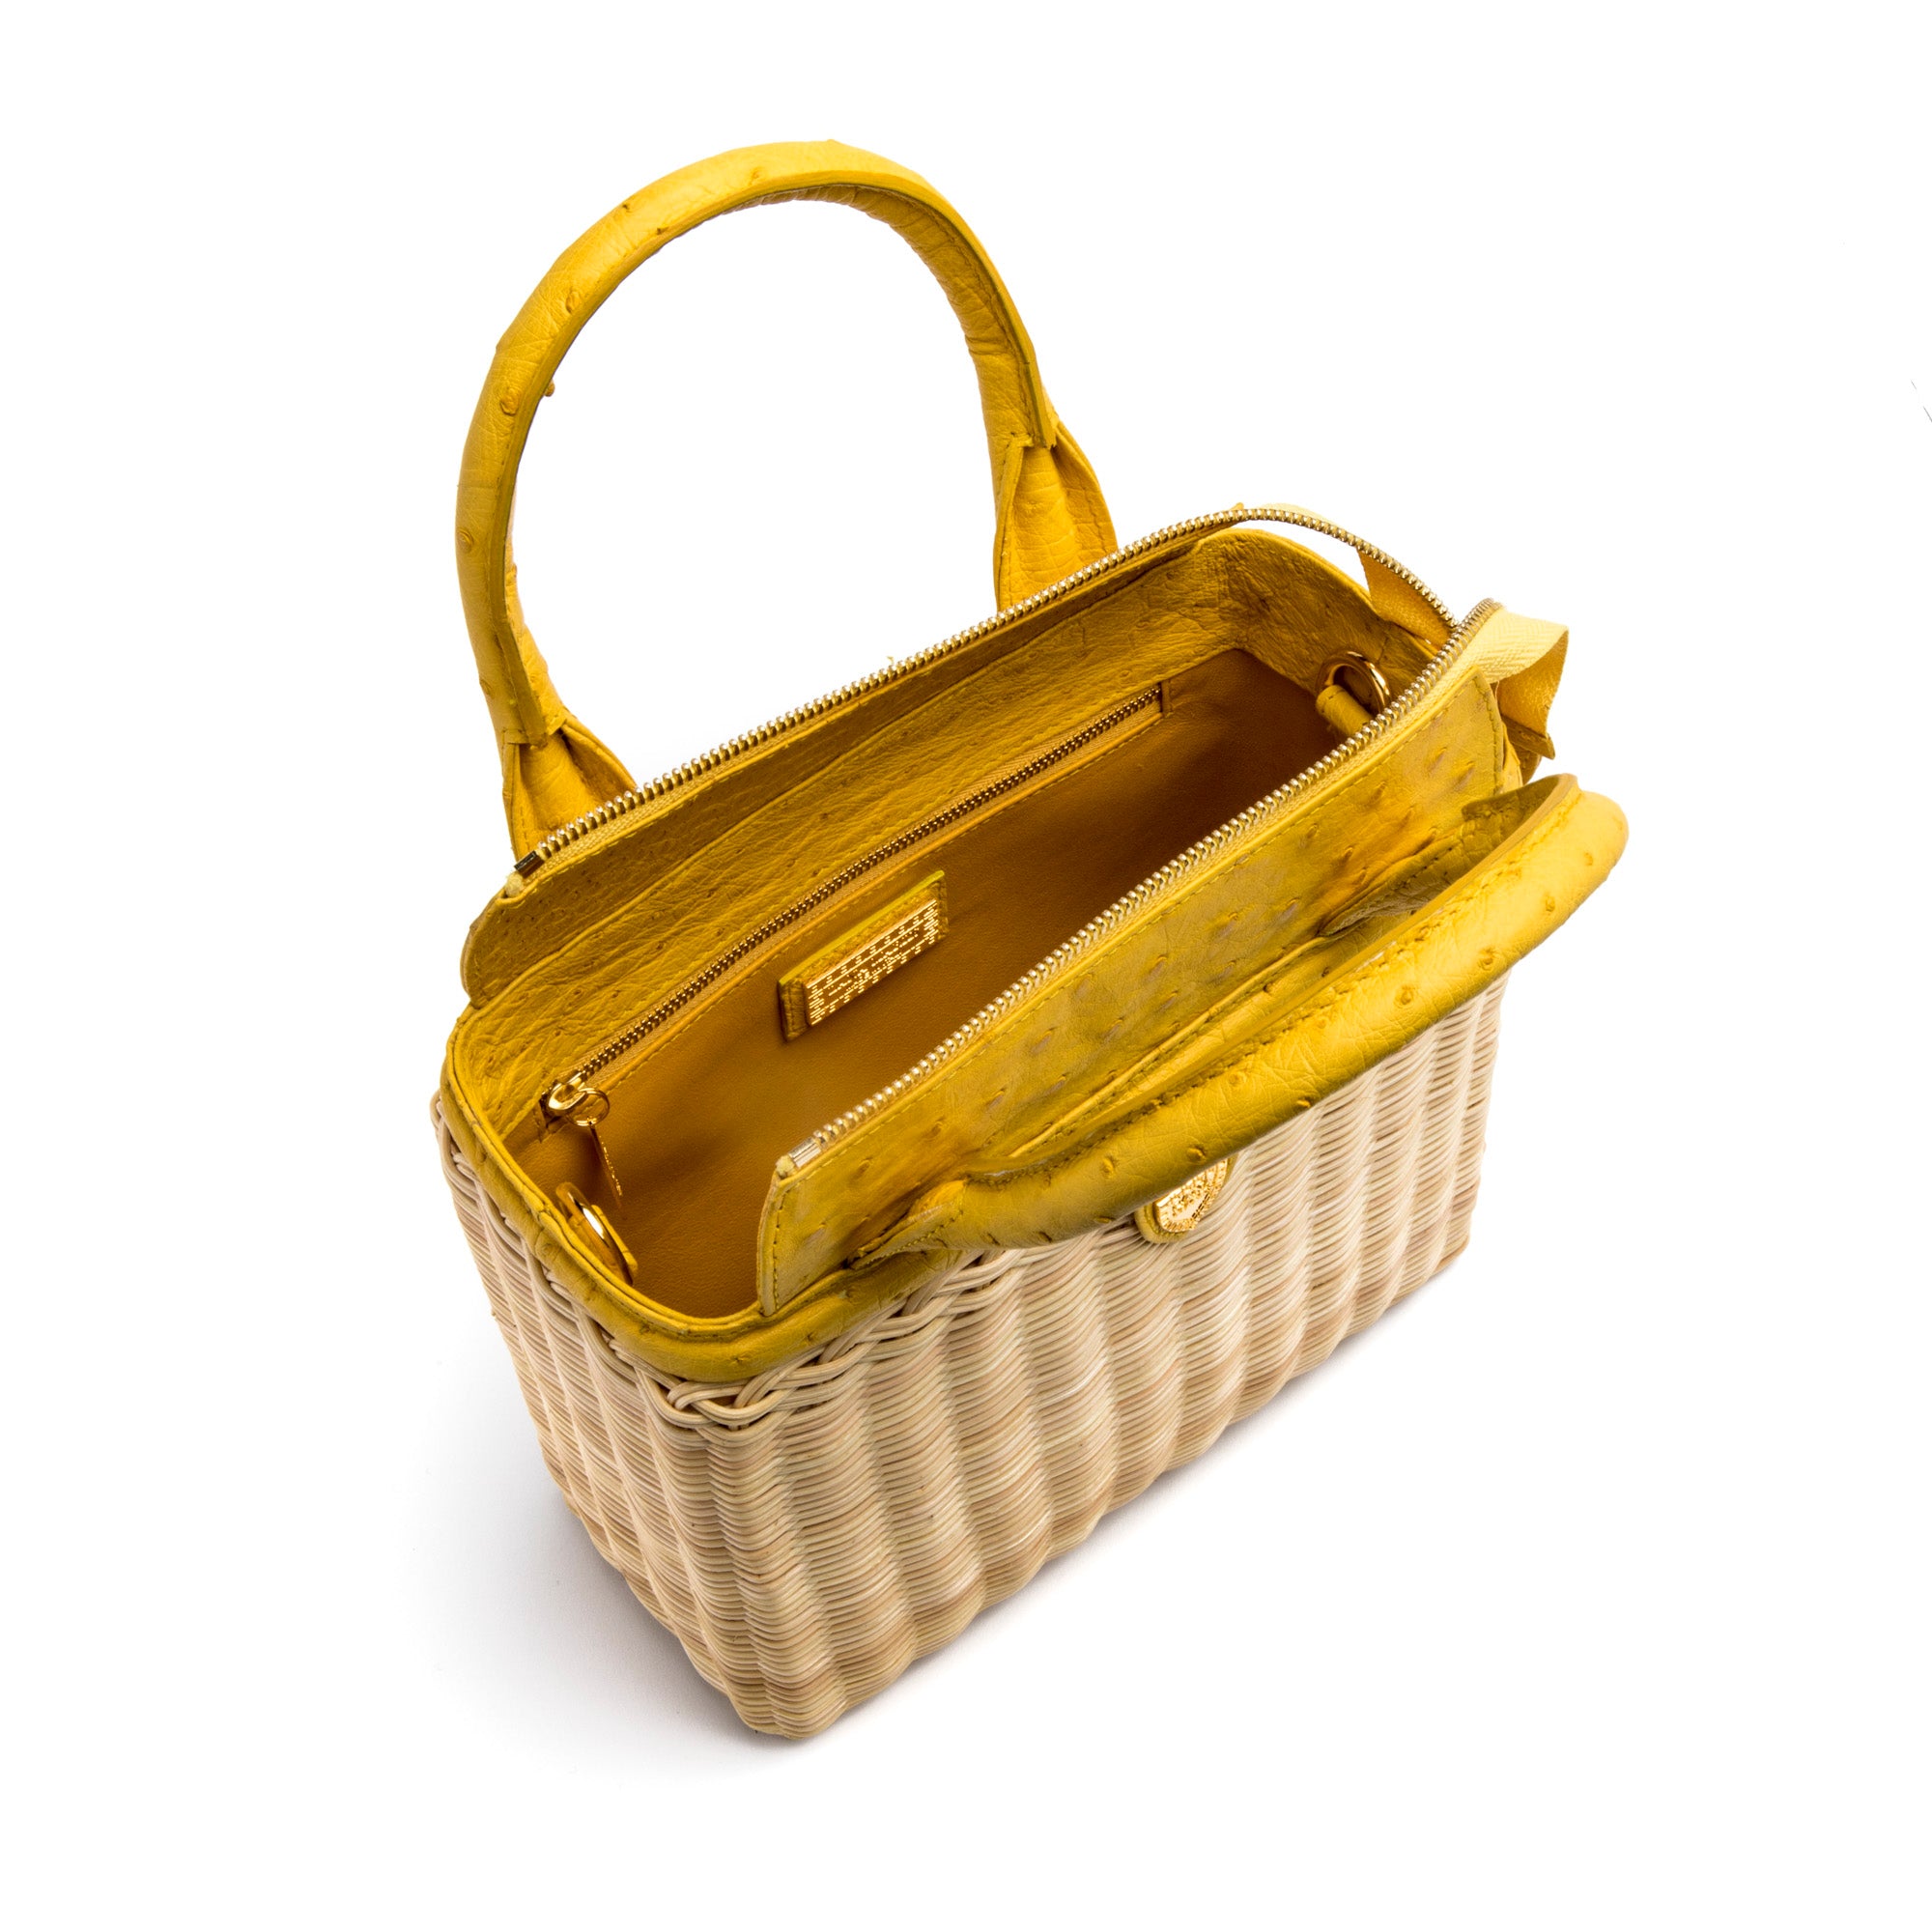 Palm Beach Tote in Yellow